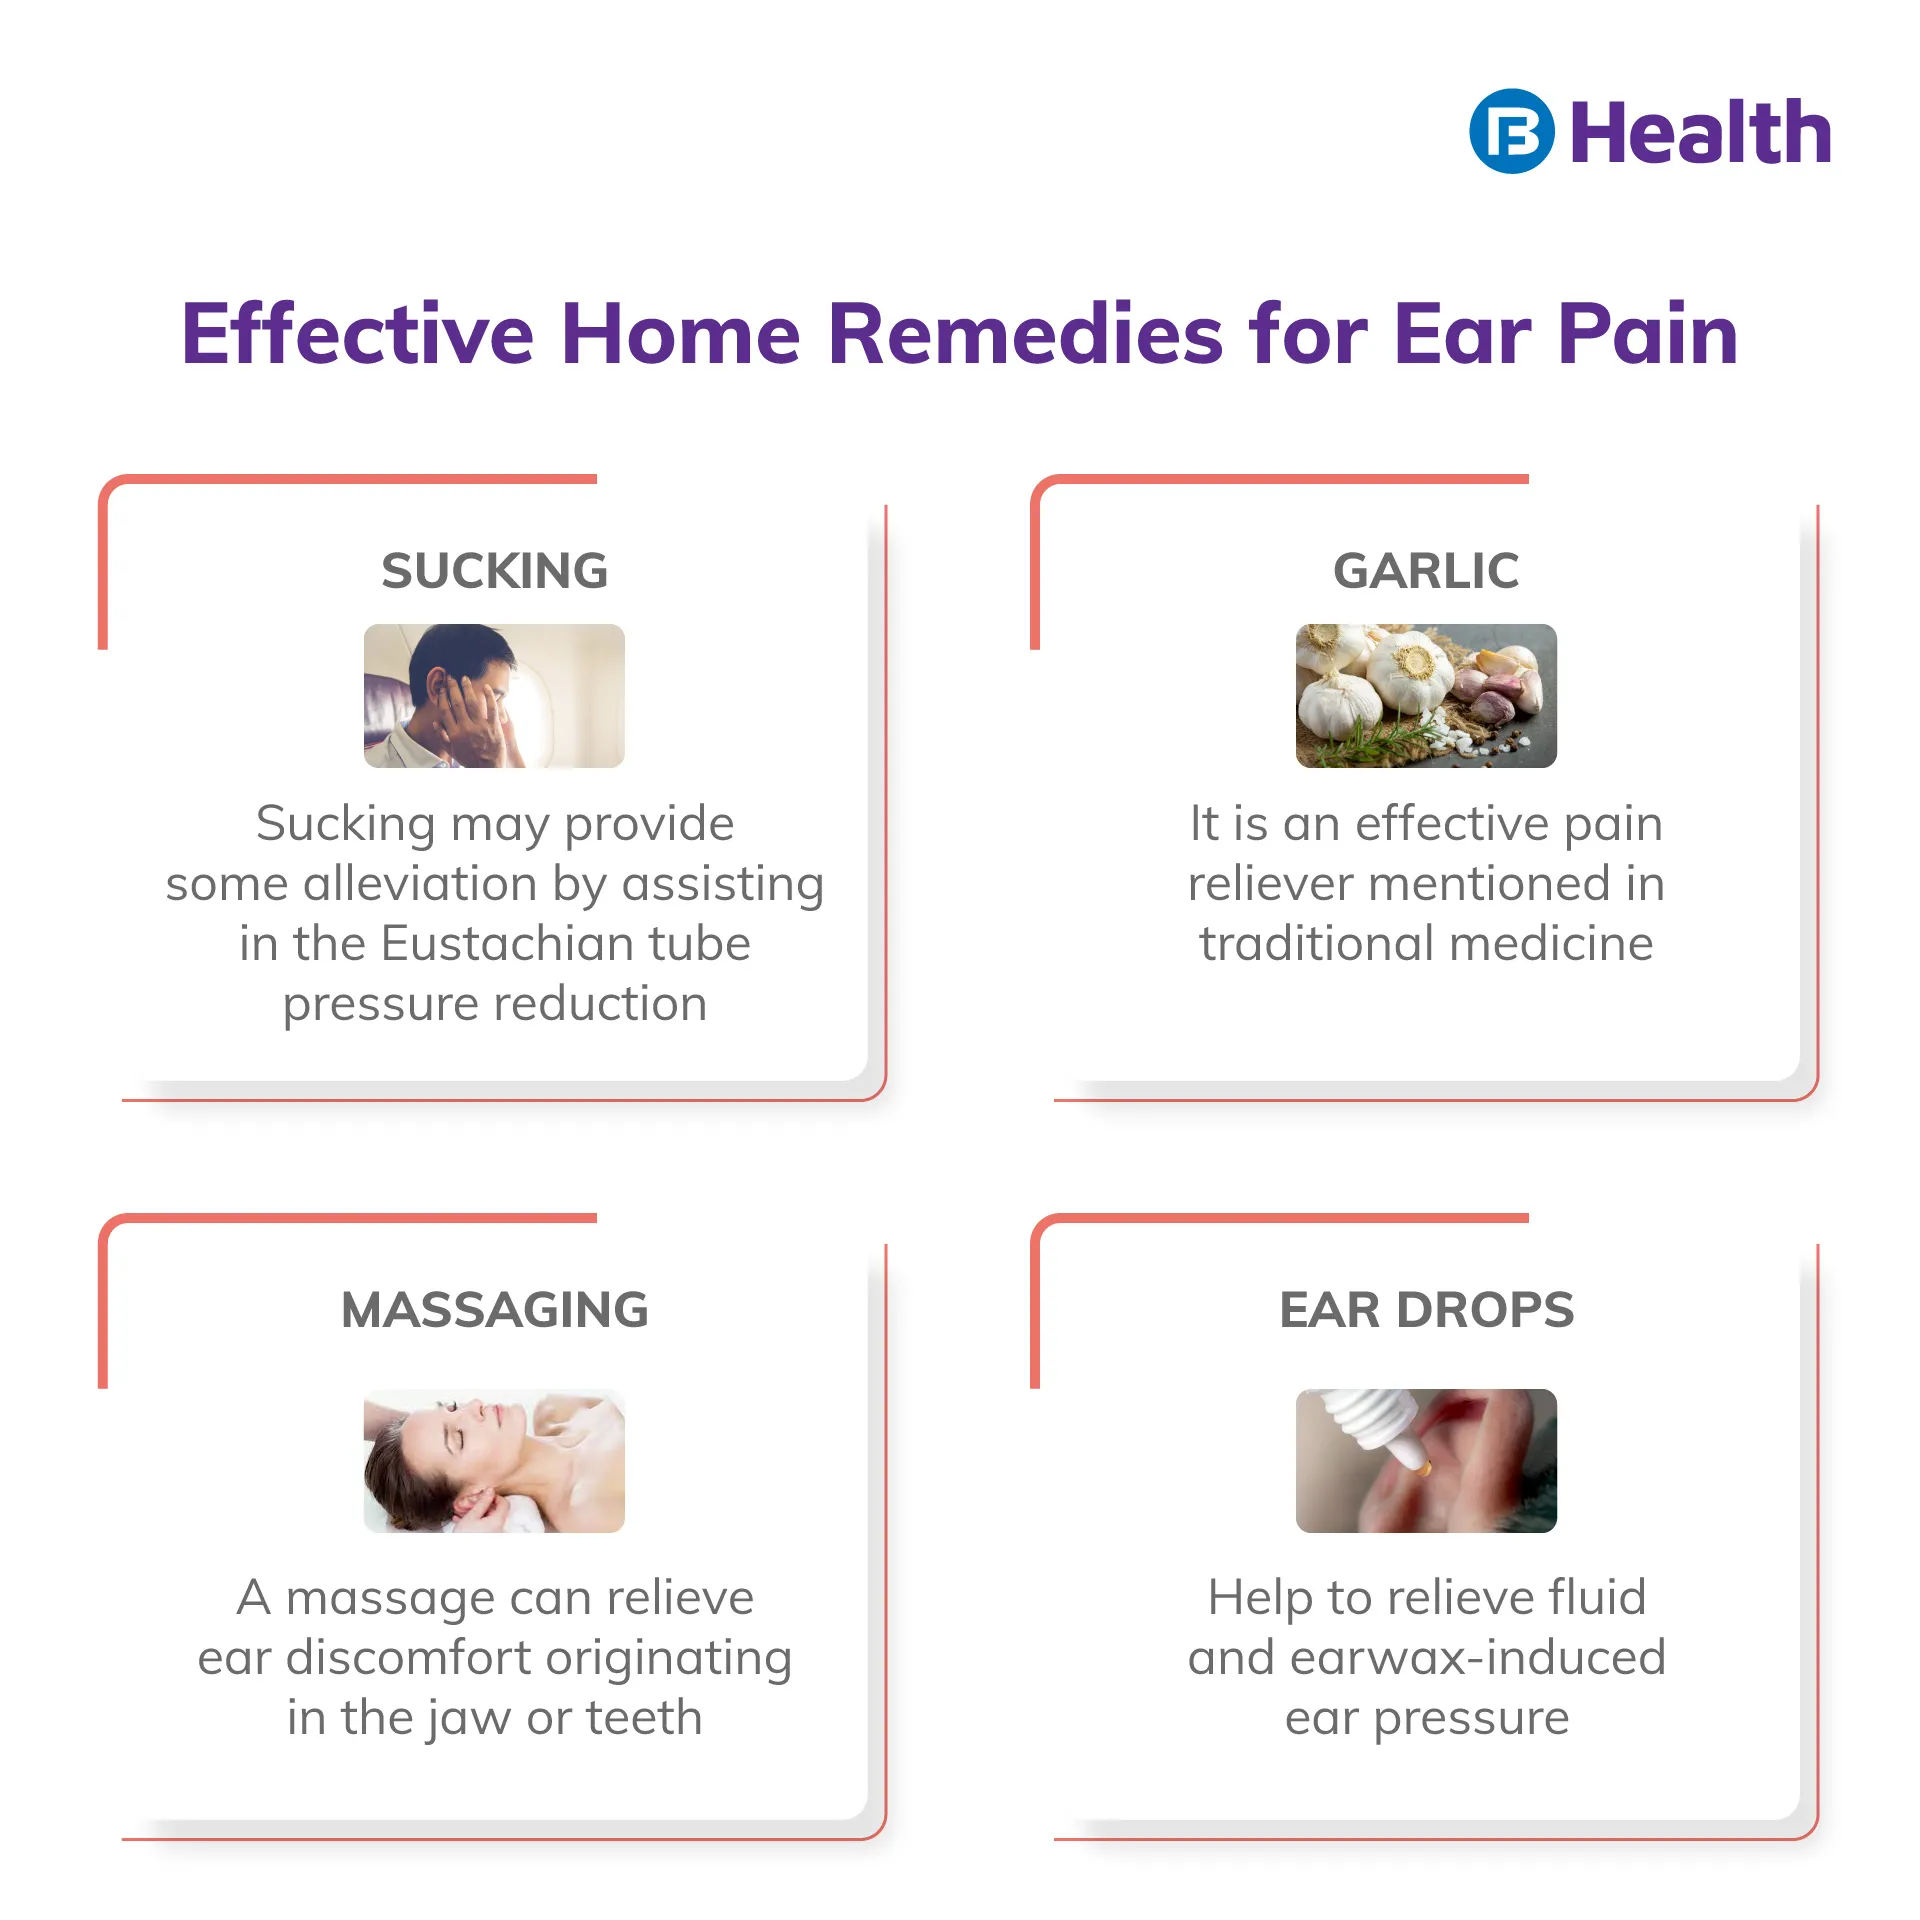 Essential Home Remedies for Ear Pain